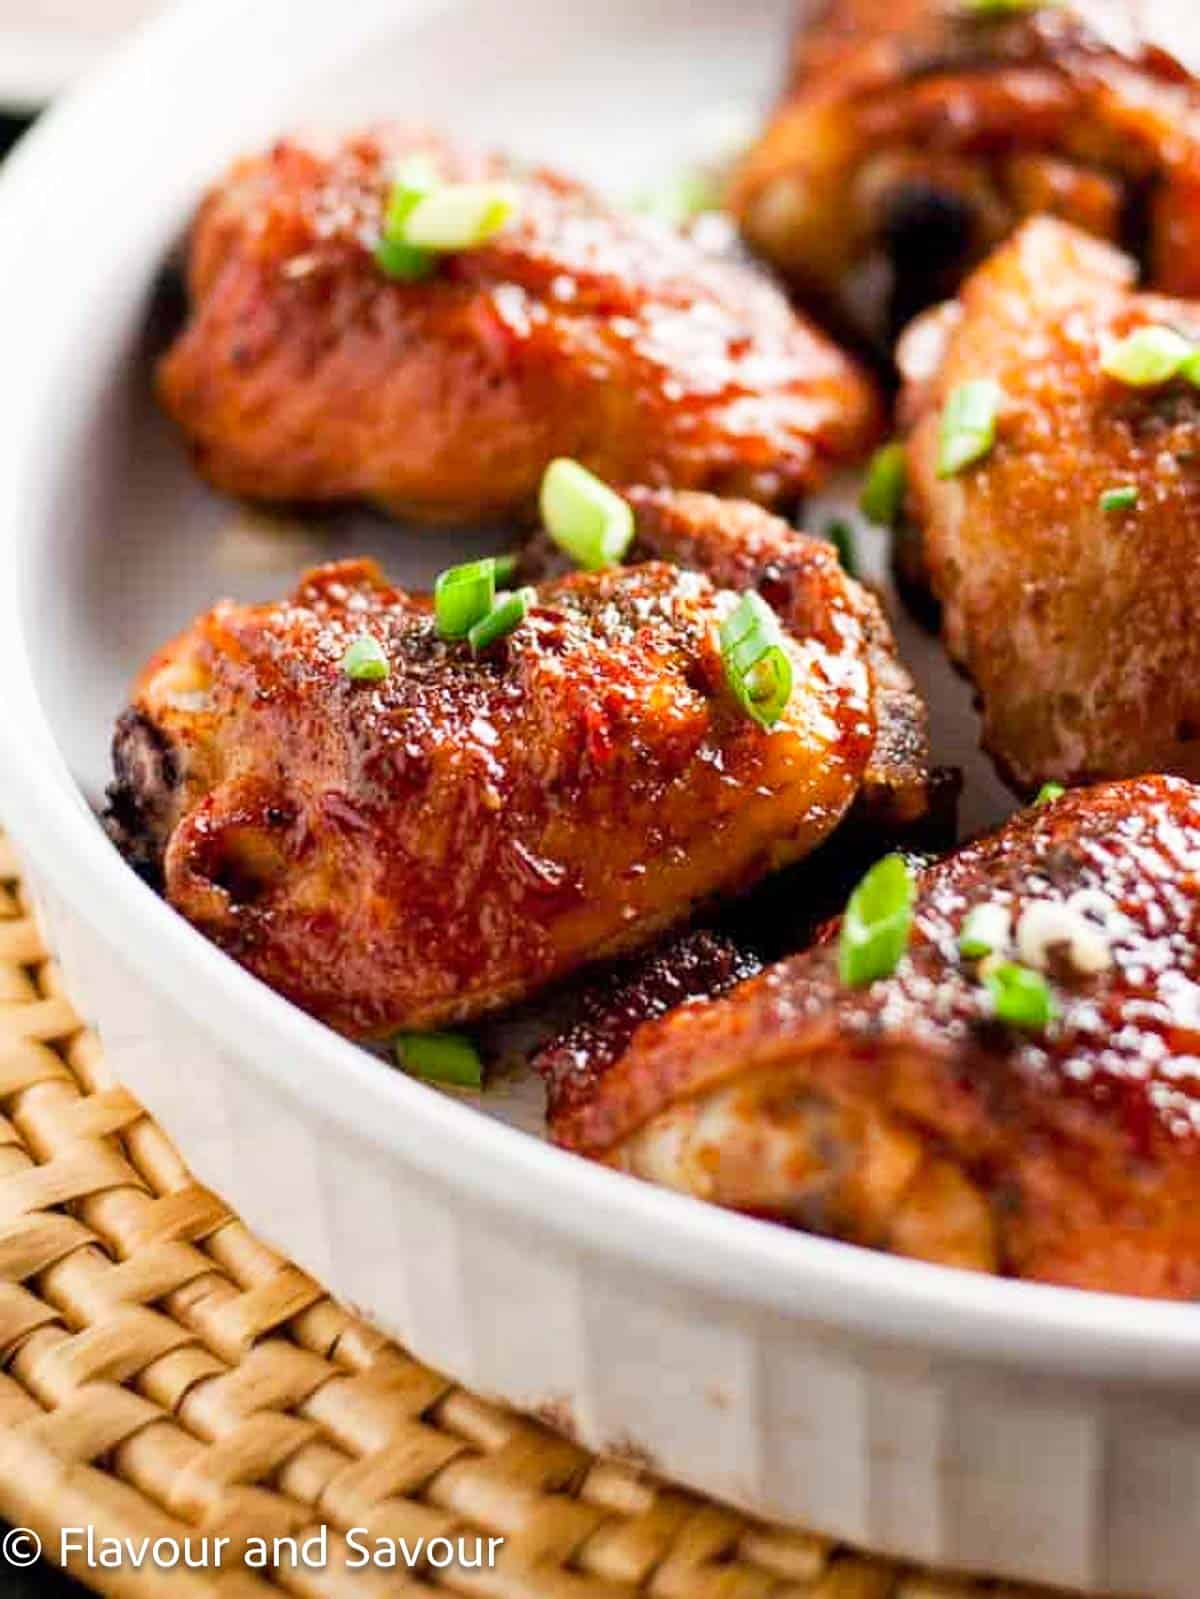 Smoky chipotle honey-mustard glazed chicken thighs in a round white serving dish garnished with sliced green onions.